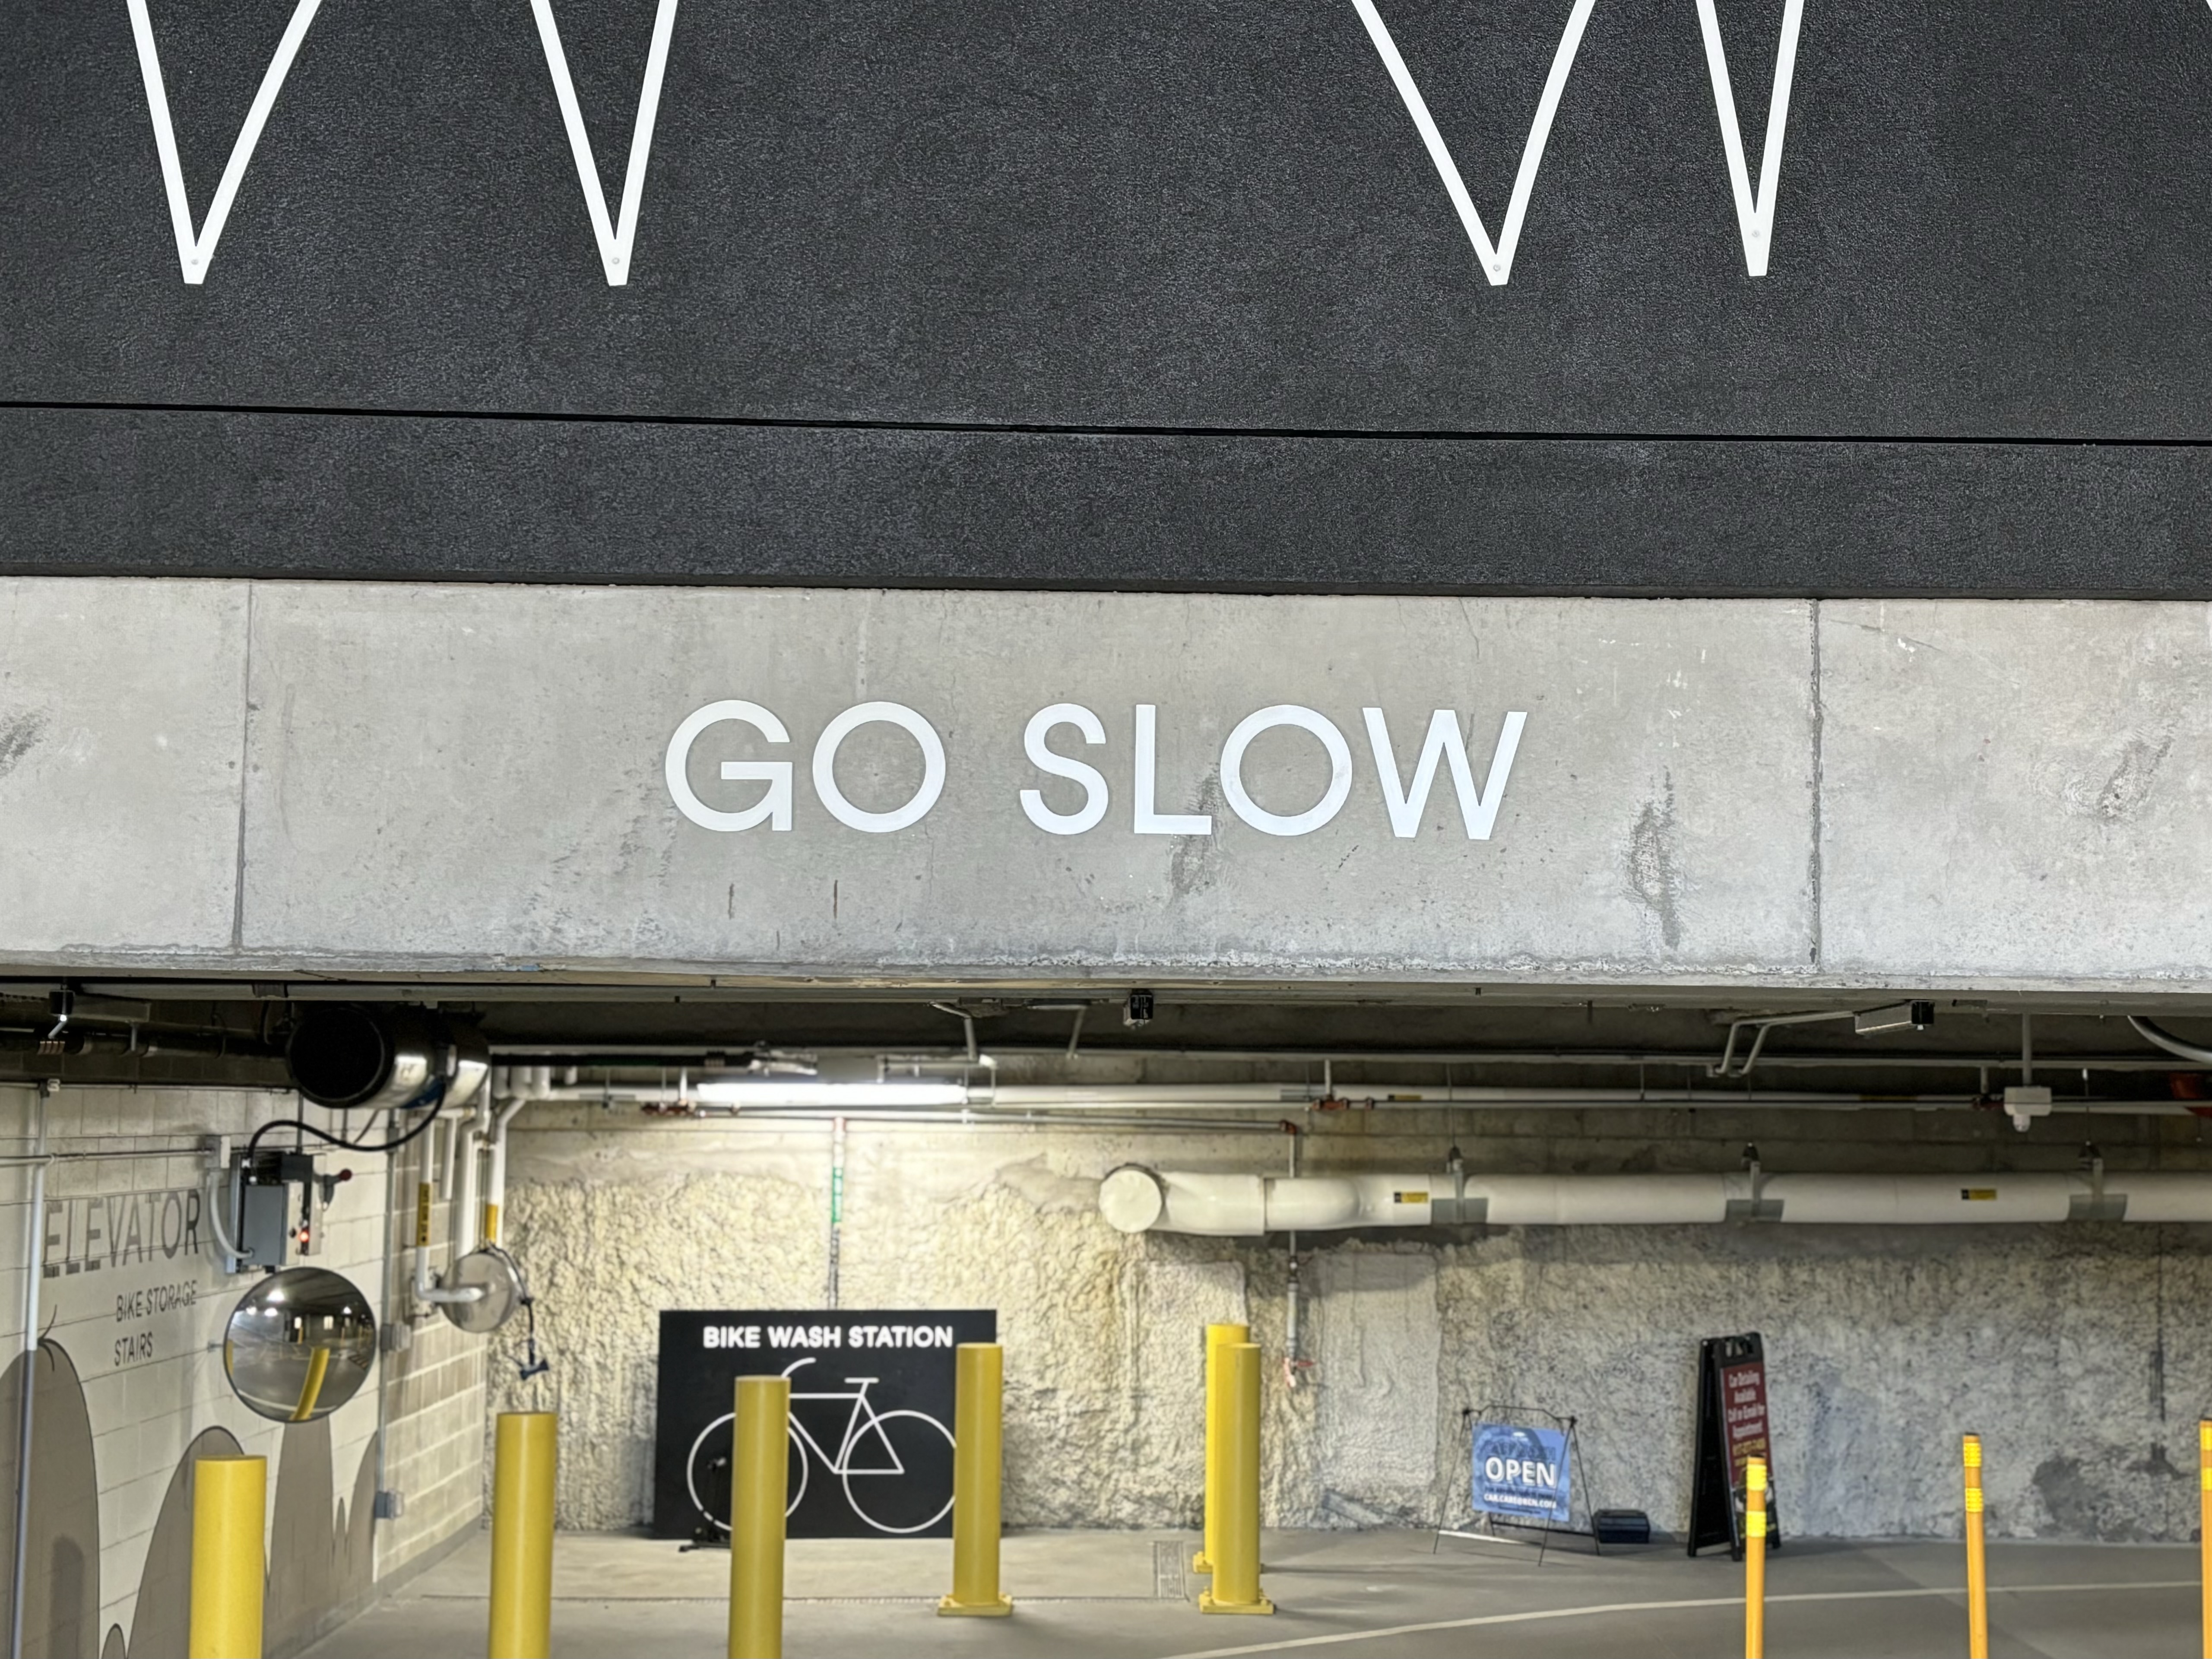 Parking garage sign that commands us to 'GO SLOW'.